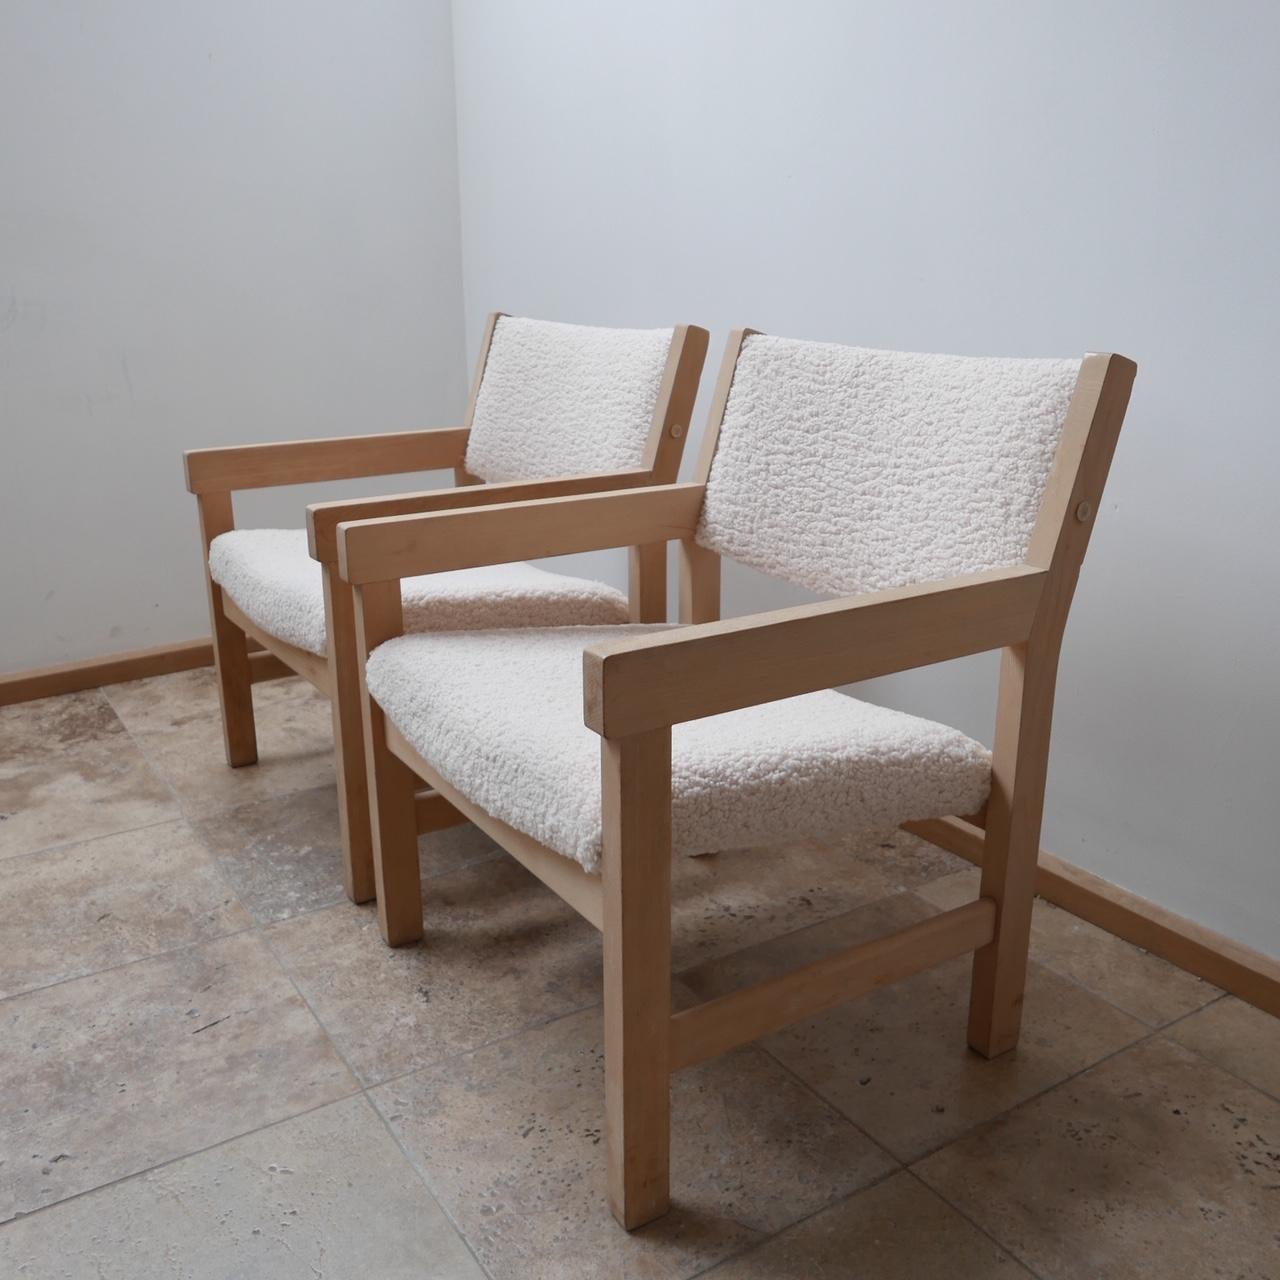 A pair of Hans J Wegner armchairs. 

Denmark, c1960s. 

Re-upholstered in thick boucle like fabric akin to sheepskin. 

Comfy and stylish. 

Price is for the pair. 

Very good condition. 

Dimensions: 62 W x 62 D x 42 seat height x 74